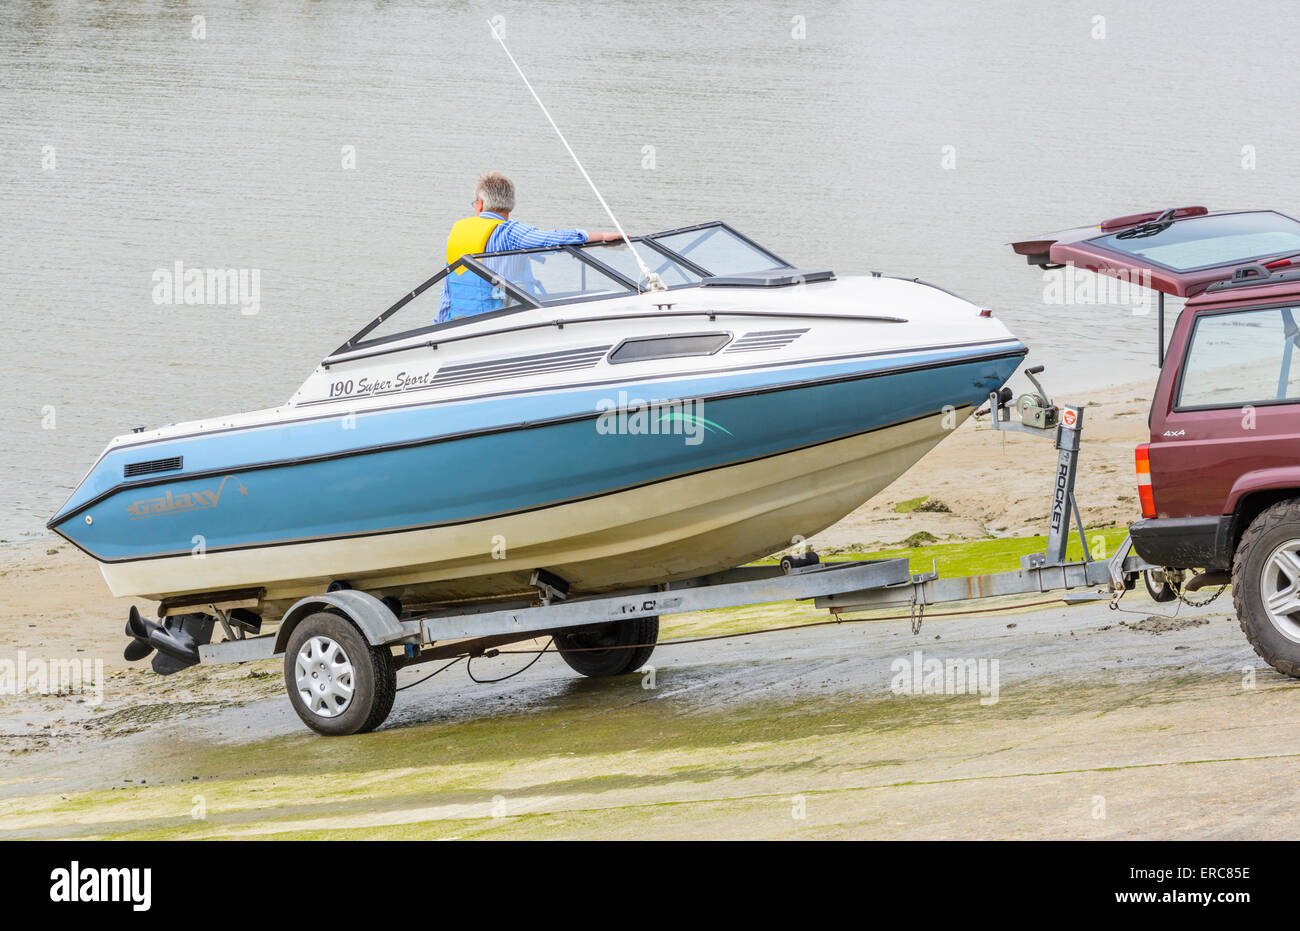 Boat on a trailer being launched into a river on a slipway. Stock Photo